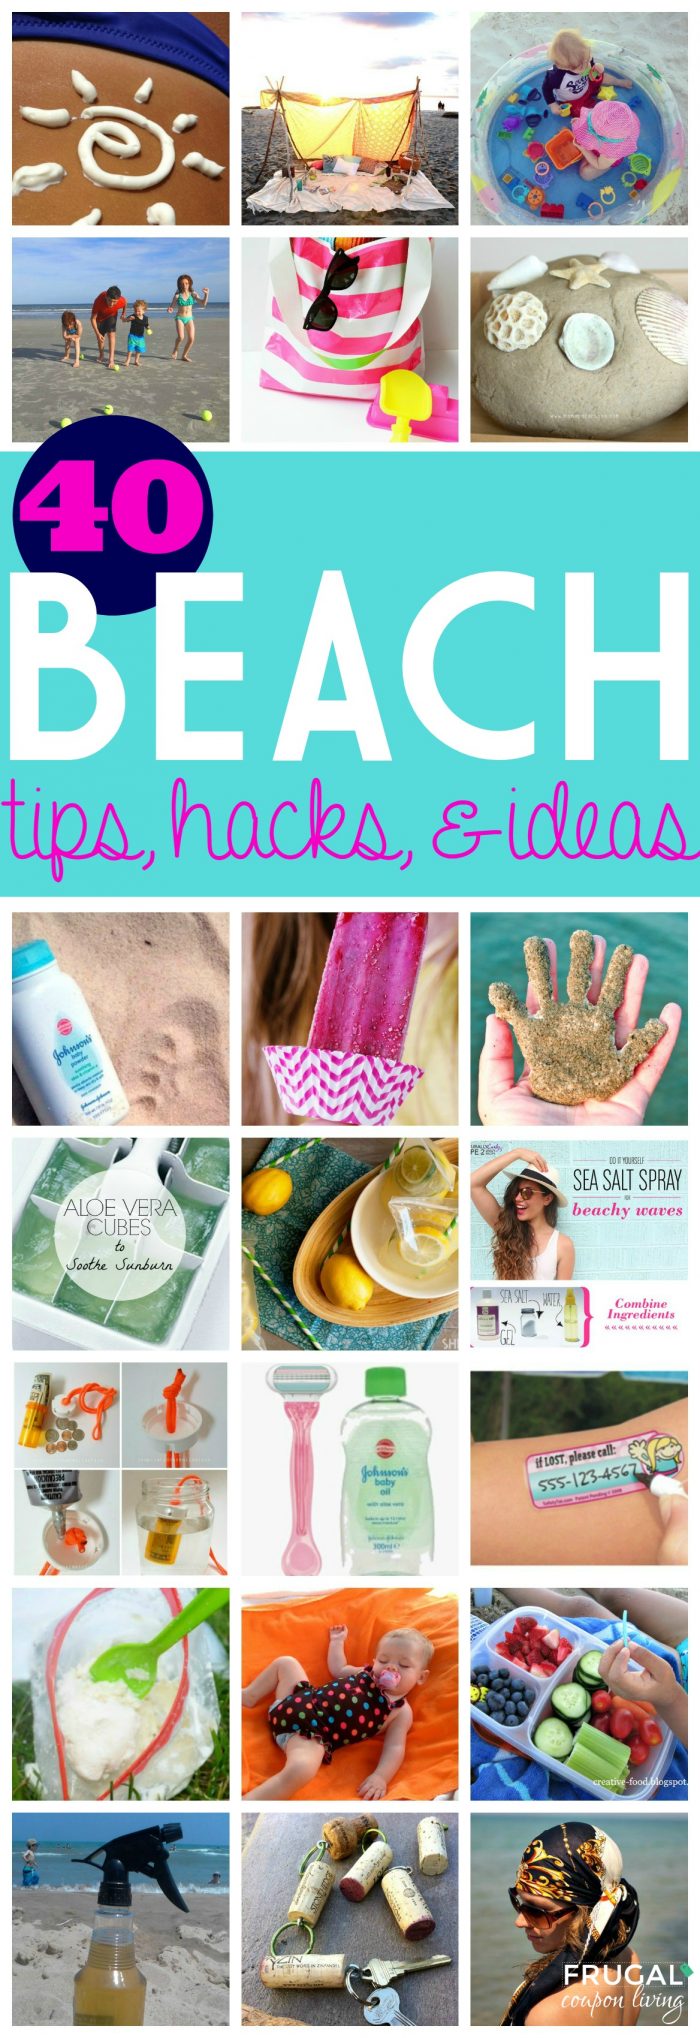 beach-tips-frugal-coupon-living-Collage